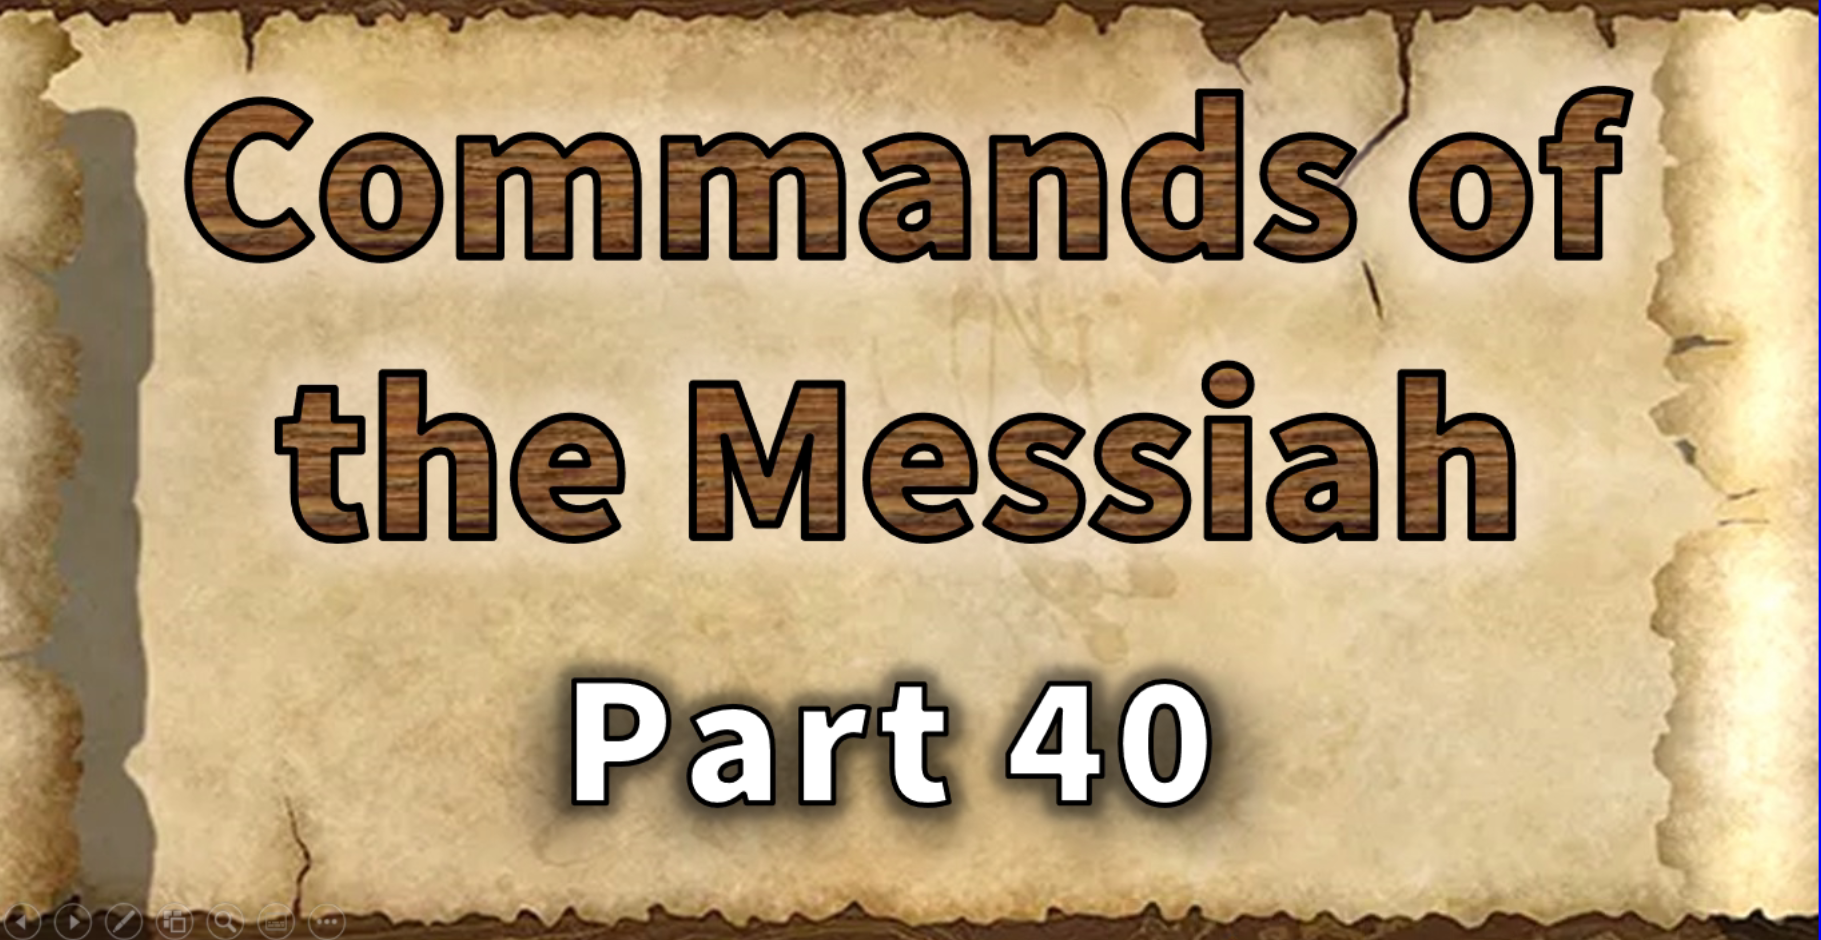 Commands of the Messiah - Part 40